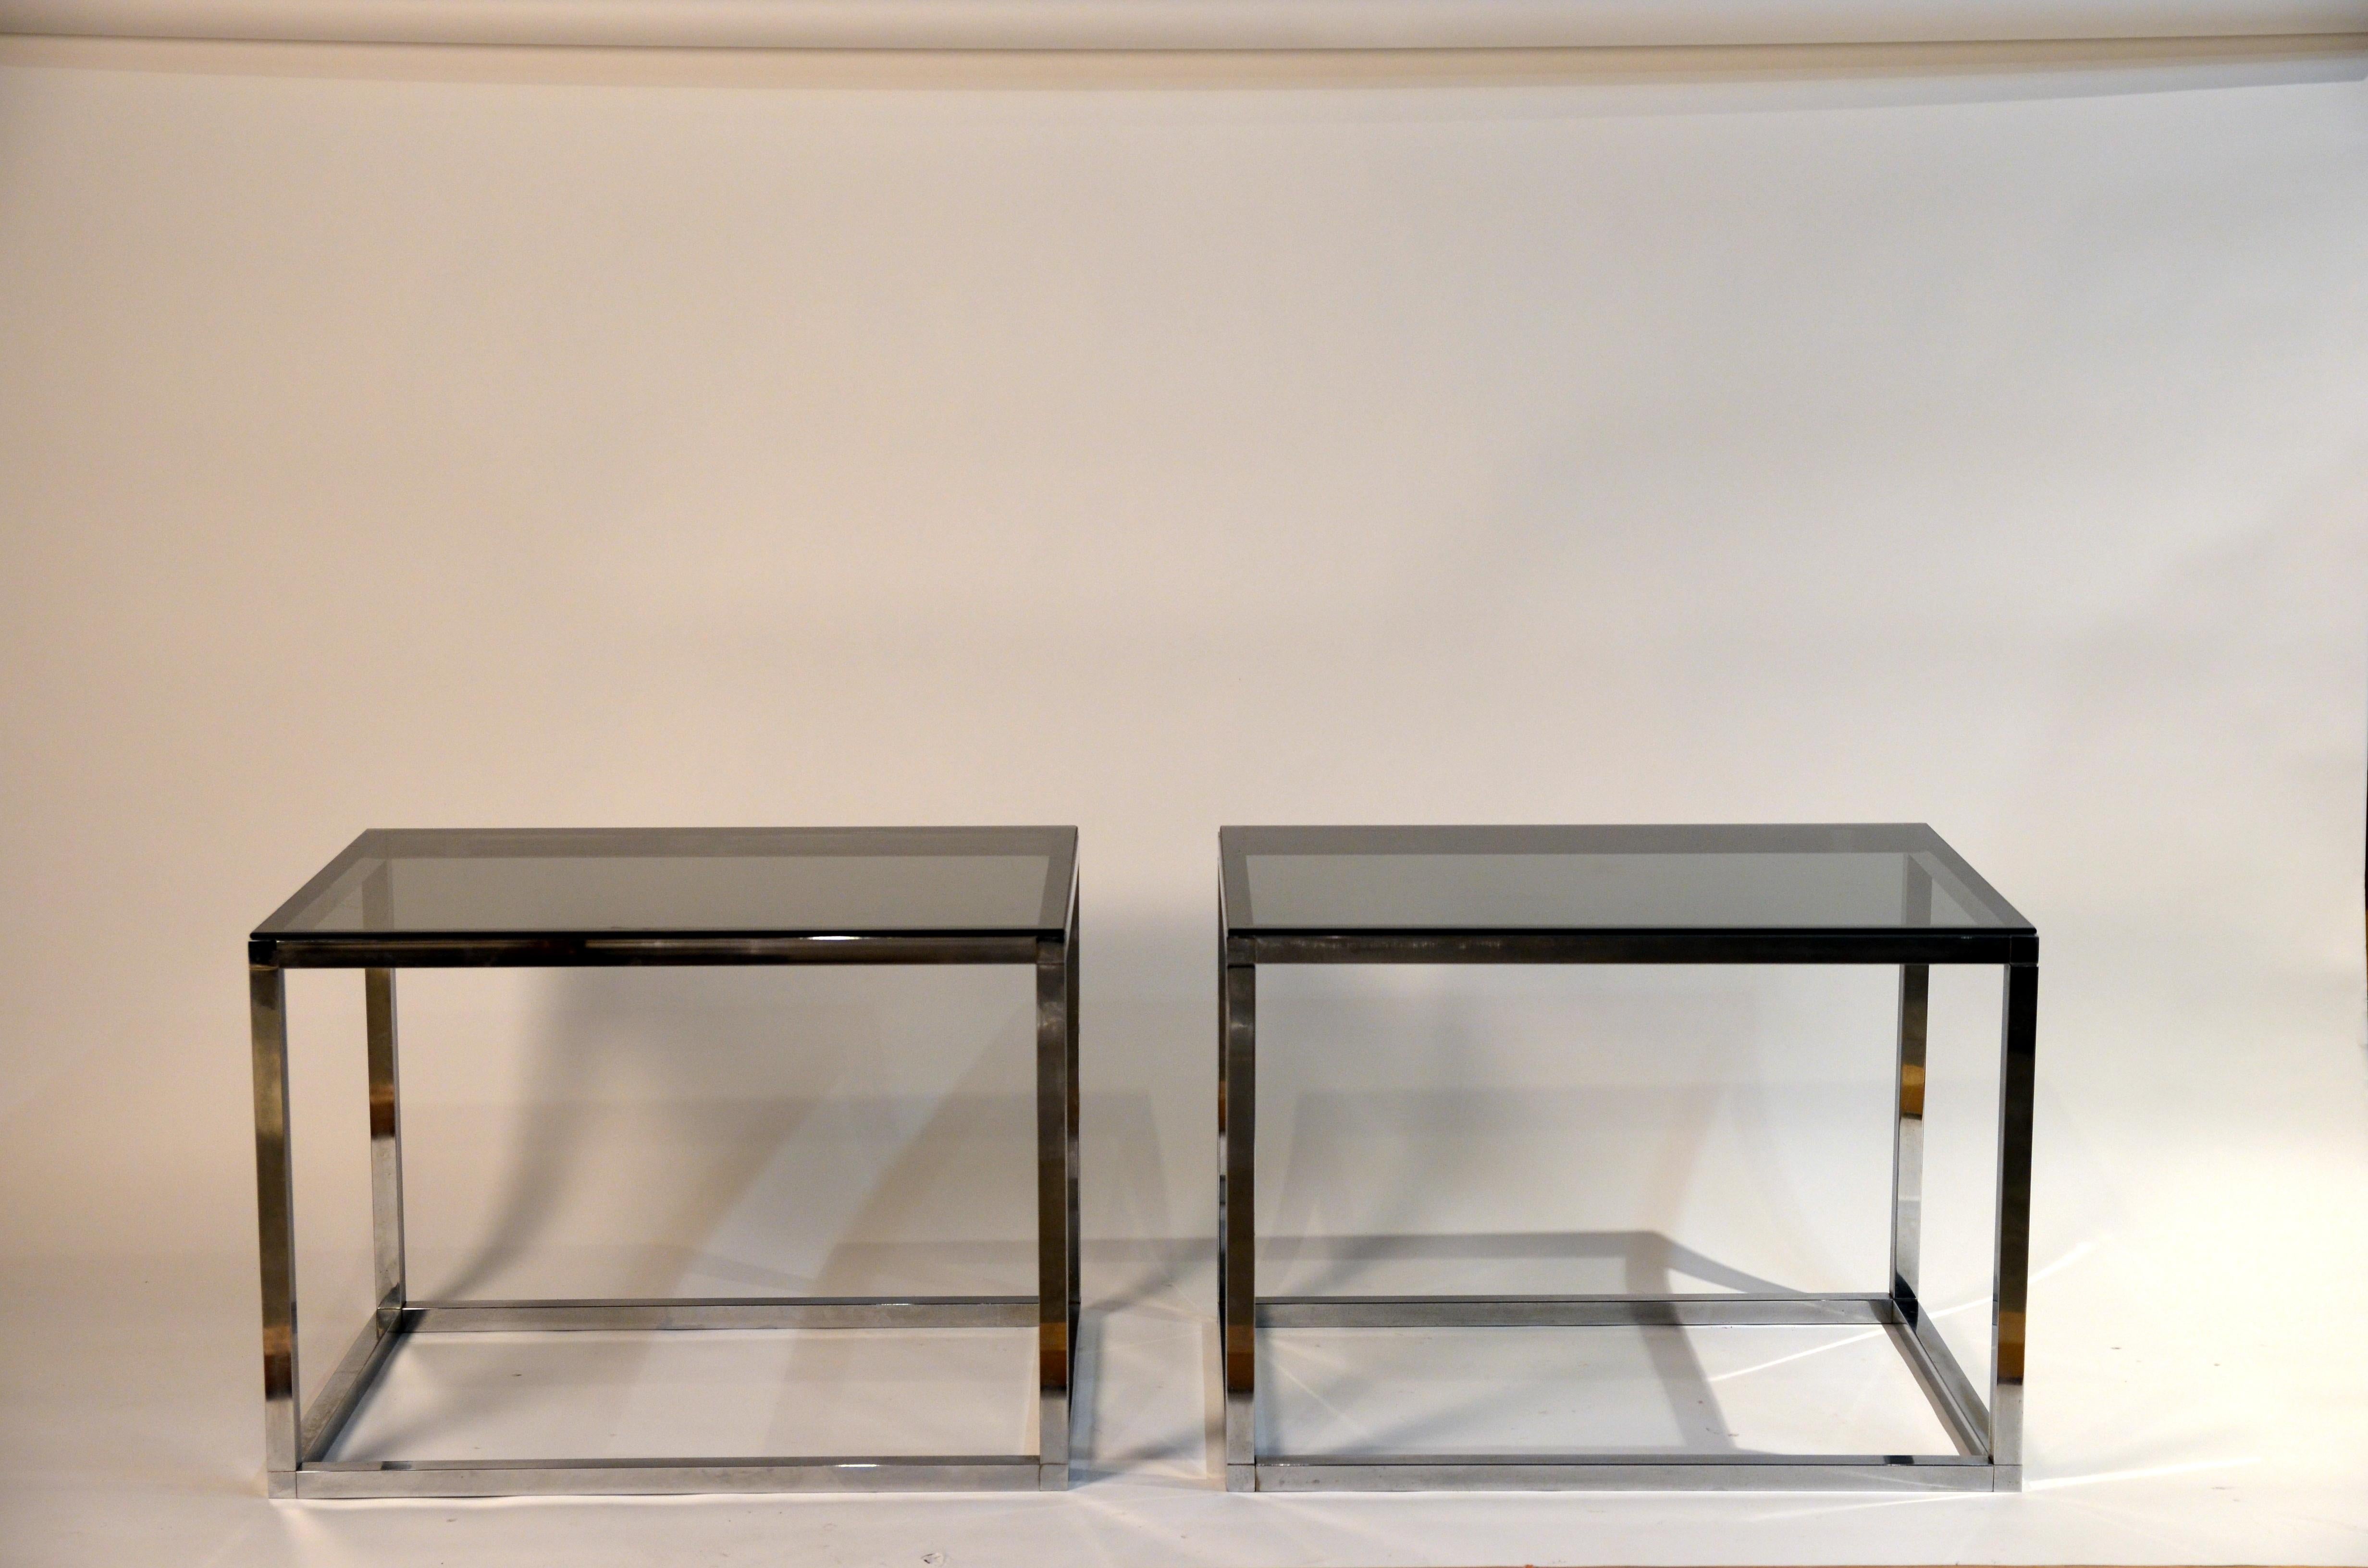 Pair of minimalistic chrome and smoked glass side or sofa end tables. Large sections; quality construction, chic pared down design.